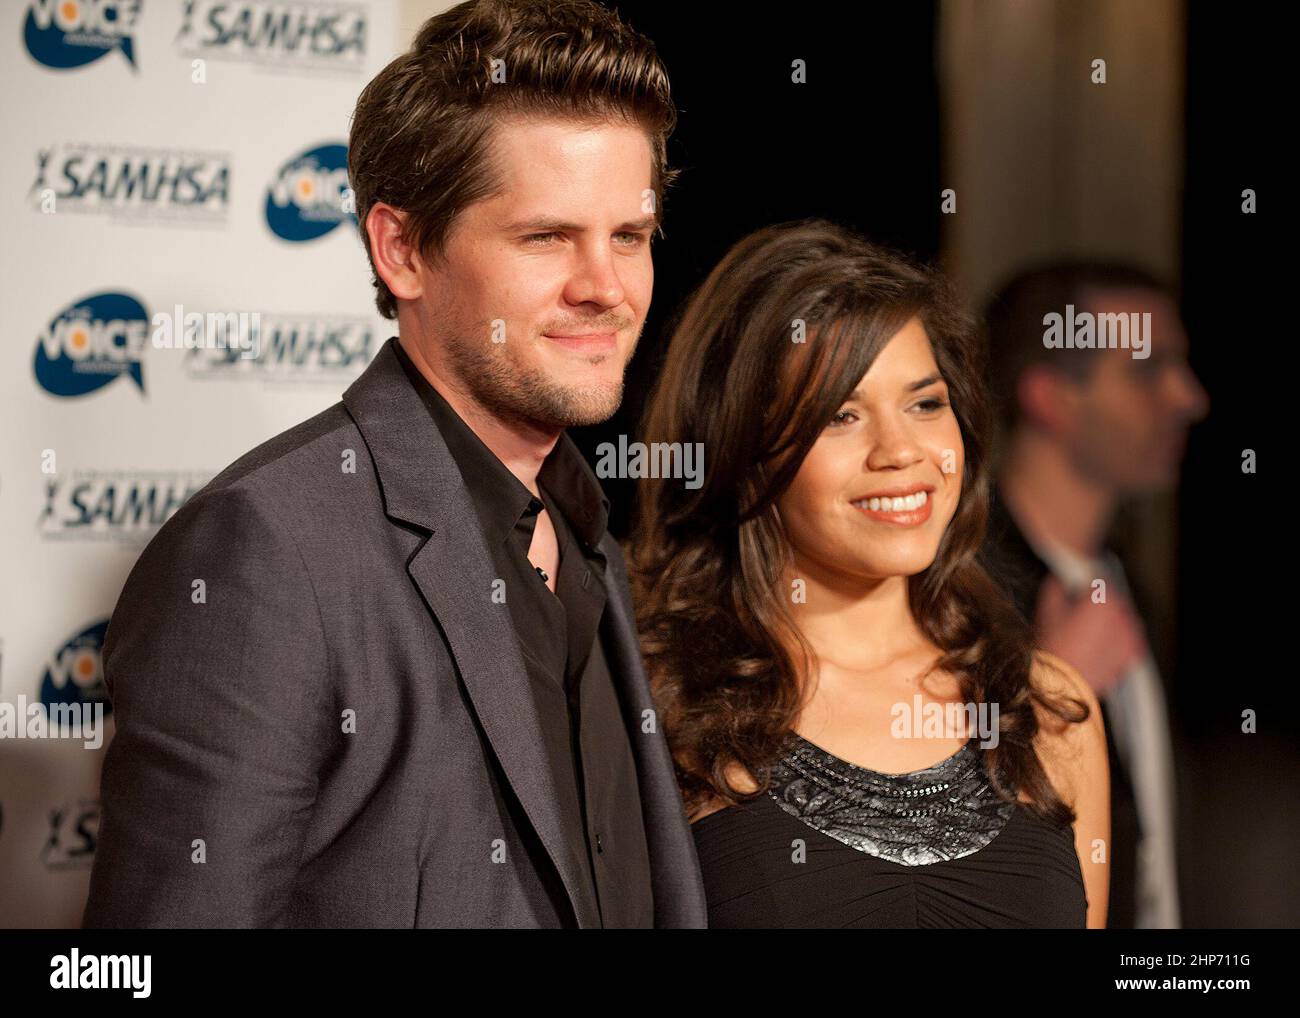 The Dry Land and Ugly Betty star America Ferrera posed with fiance and Voice Award winning writer and director of The Dry Land, Ryan Piers Williams, on the red carpet at the 2010 Voice Awards at Paramount Studios in Hollywood on October 13 ca.  2010 Stock Photo